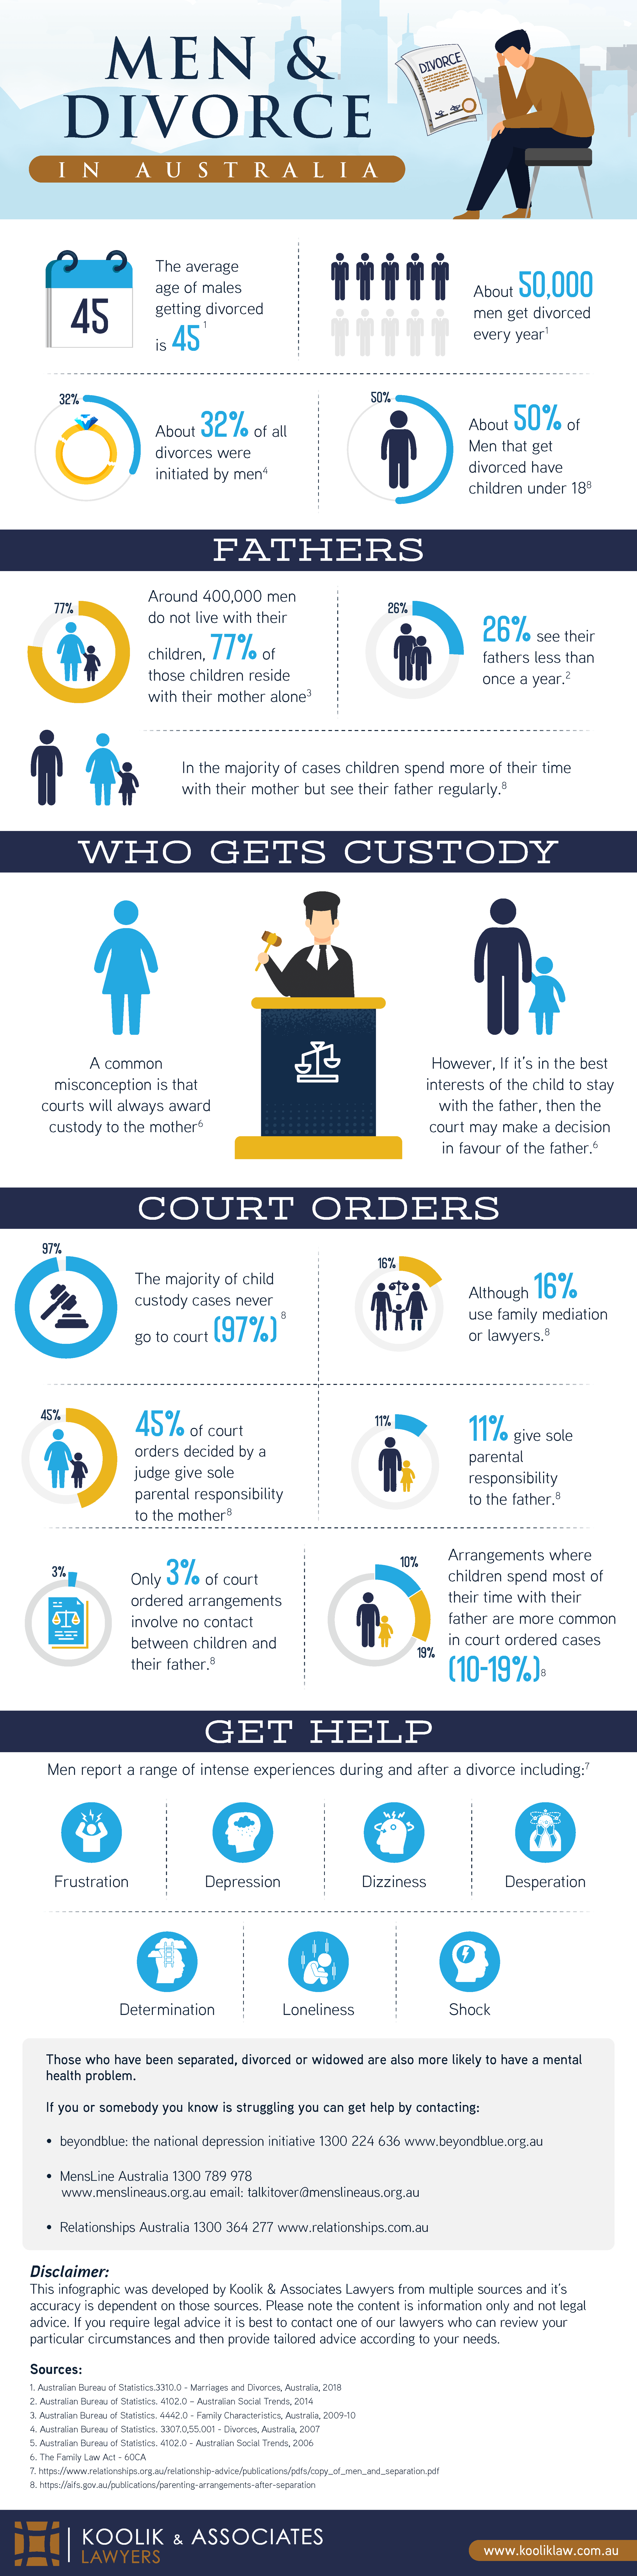 infographic that gives an overview of divorce for men in Australia